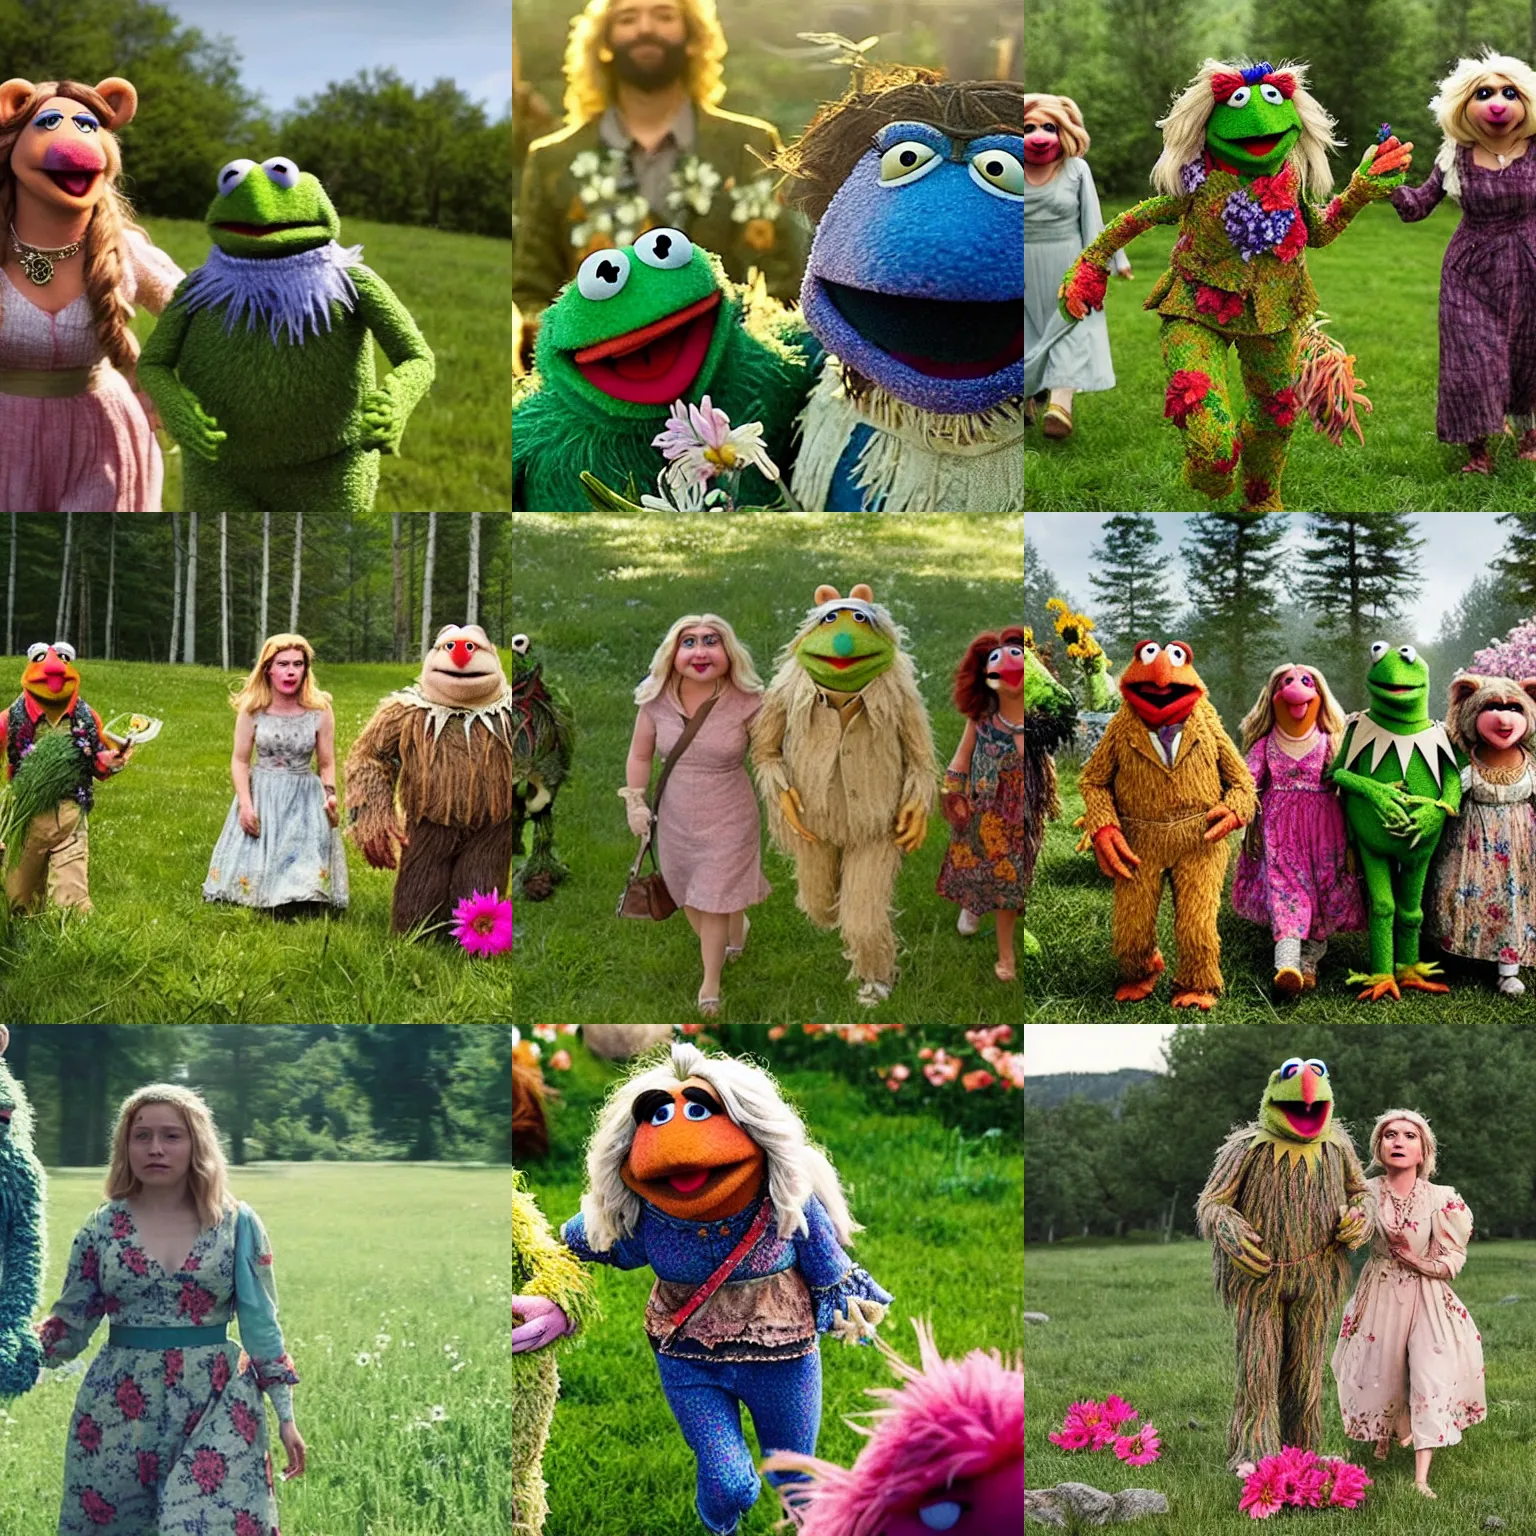 Prompt: “Movie still of Muppets Midsommar (2019) by Ari Aster”